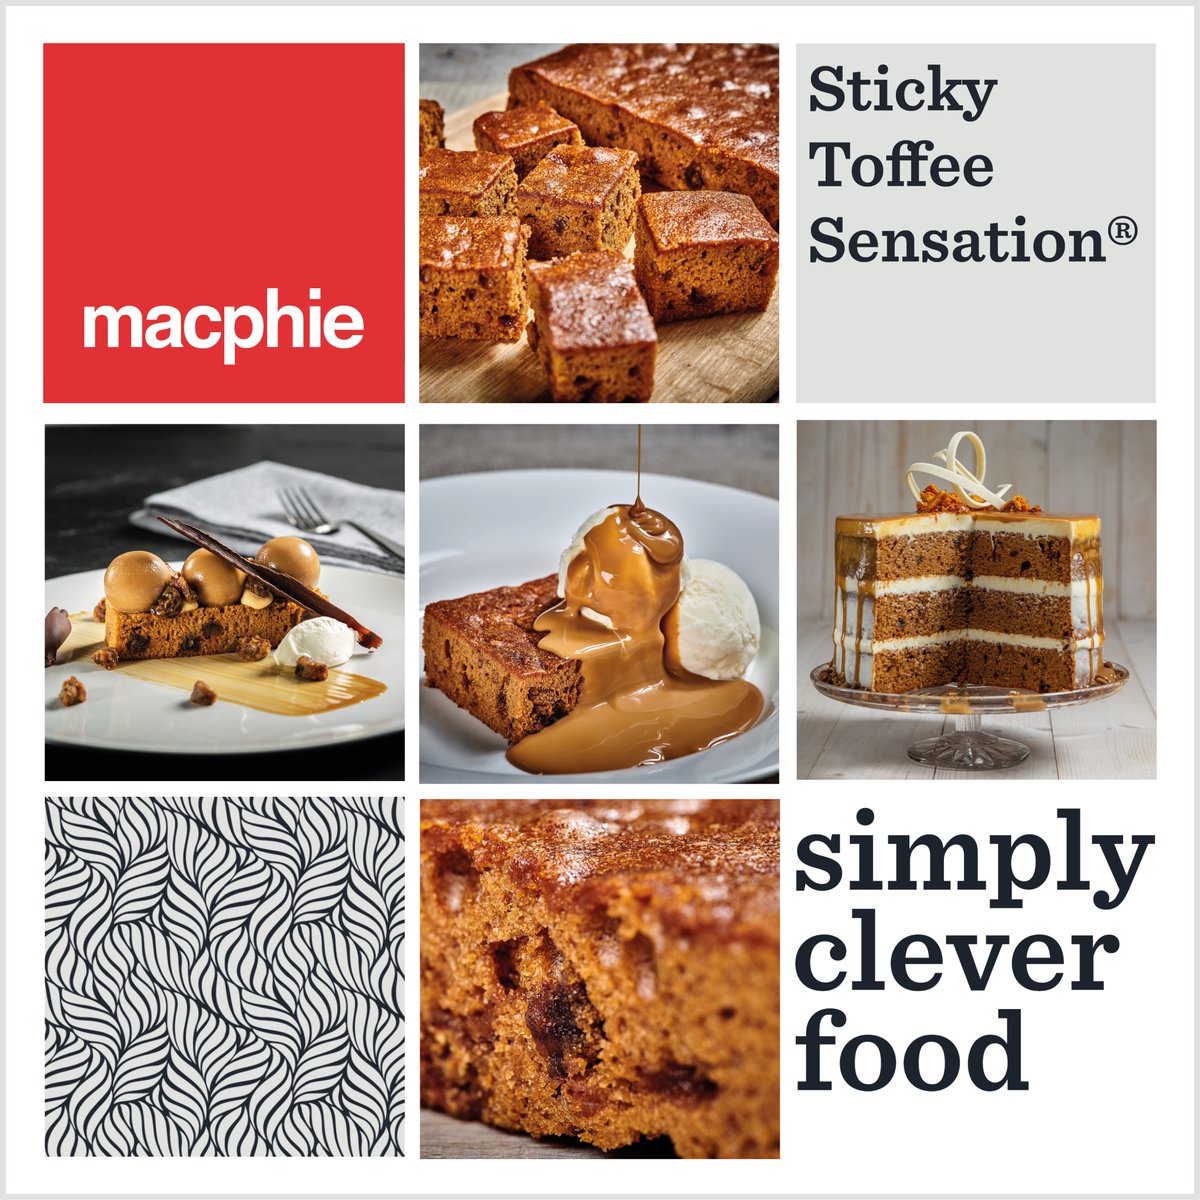 As consumers find comfort in nostalgic flavours, Macphie have launched a Sticky Toffee Sensation® Mix. Simply add water and vegetable oil to create muffins, loaf cakes, celebration cakes and of course puddings! Contact your local BAKO for further information today!